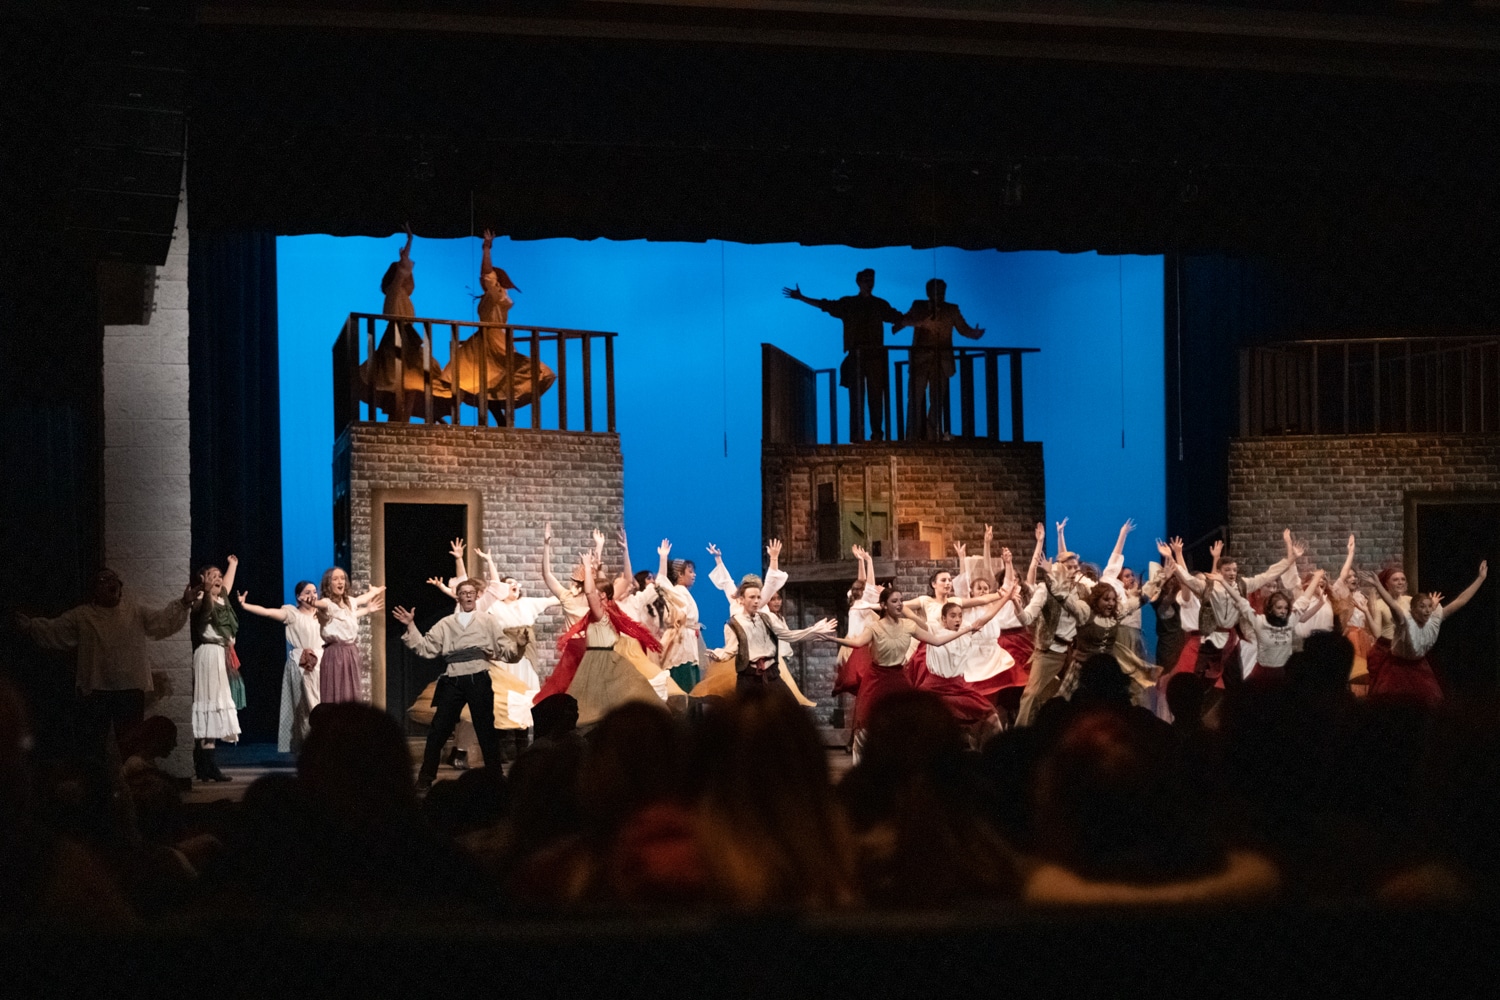 Fremont High School students on stage during their production of Anastasia. Hayden Reeve is performing on the left side of the stage.